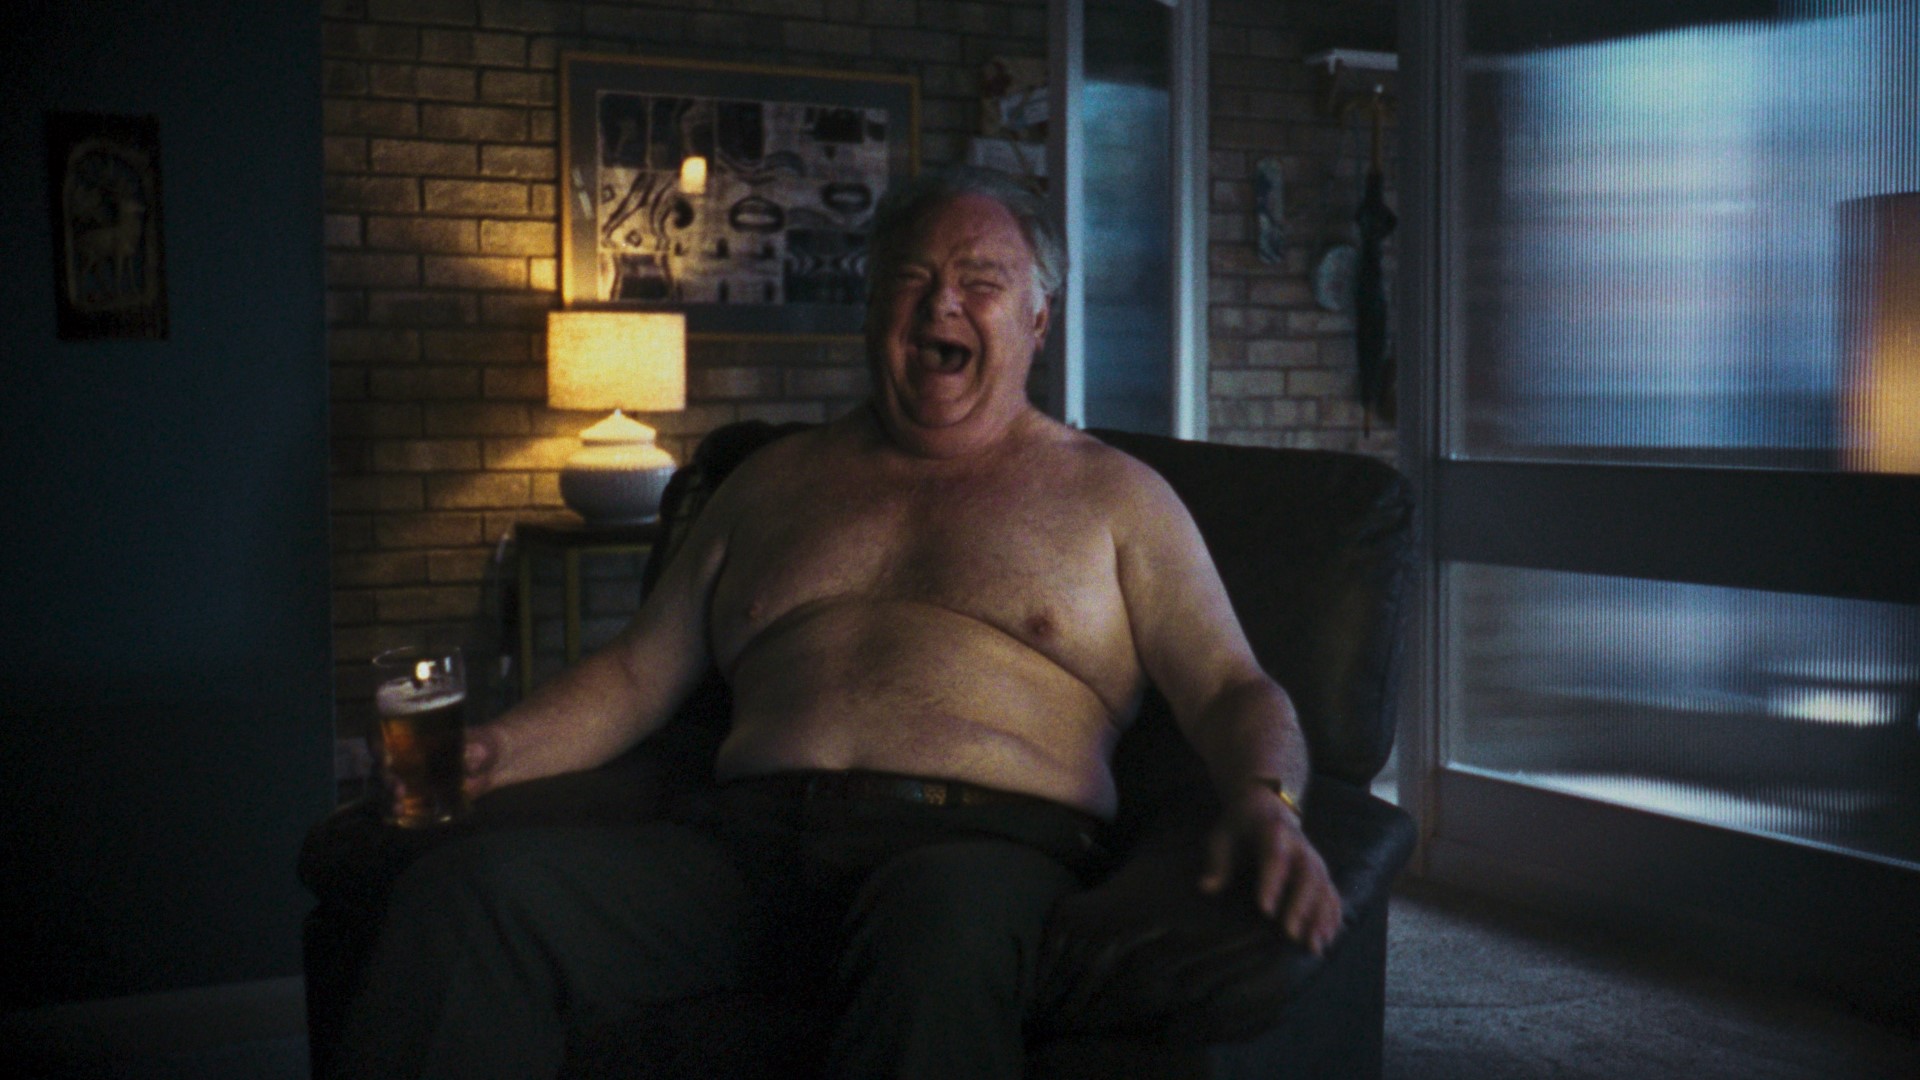 A fat man sitting in a chair in his living room with his top off